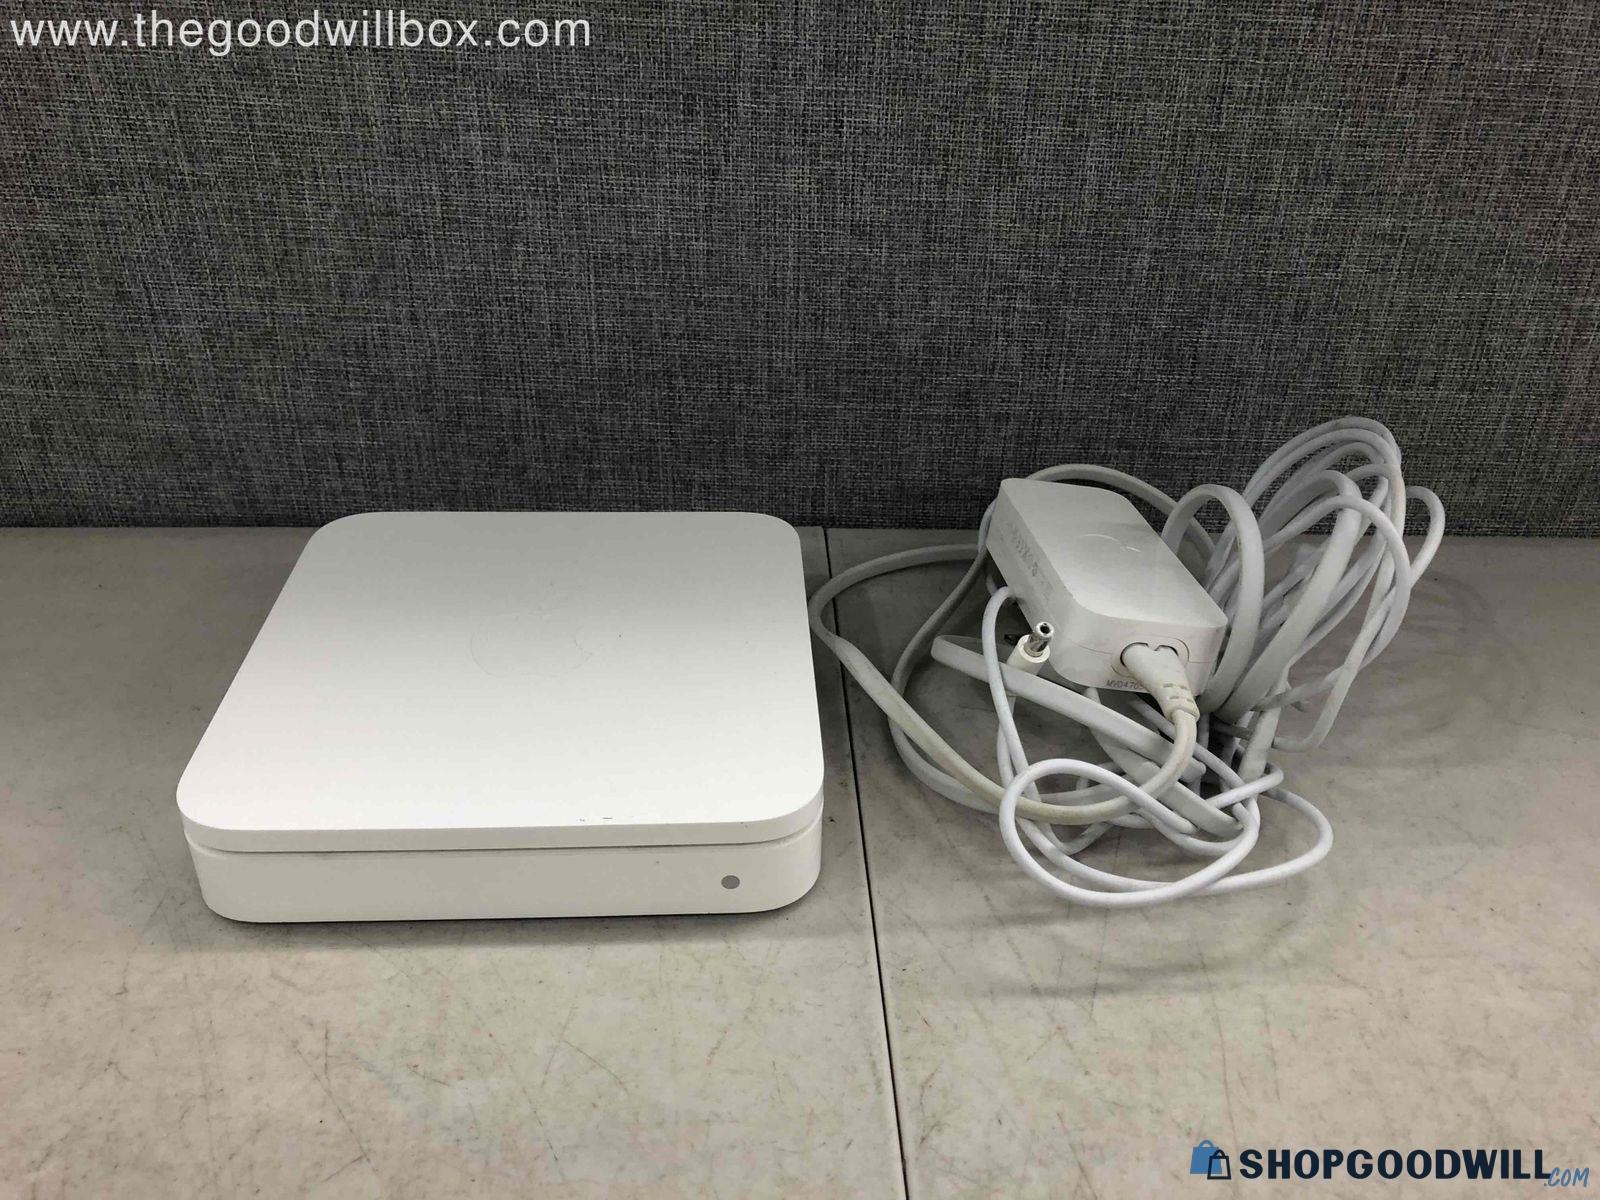 Apple AirPort Extreme Base Station A1354 12V 1.8A Wireless Router w ...